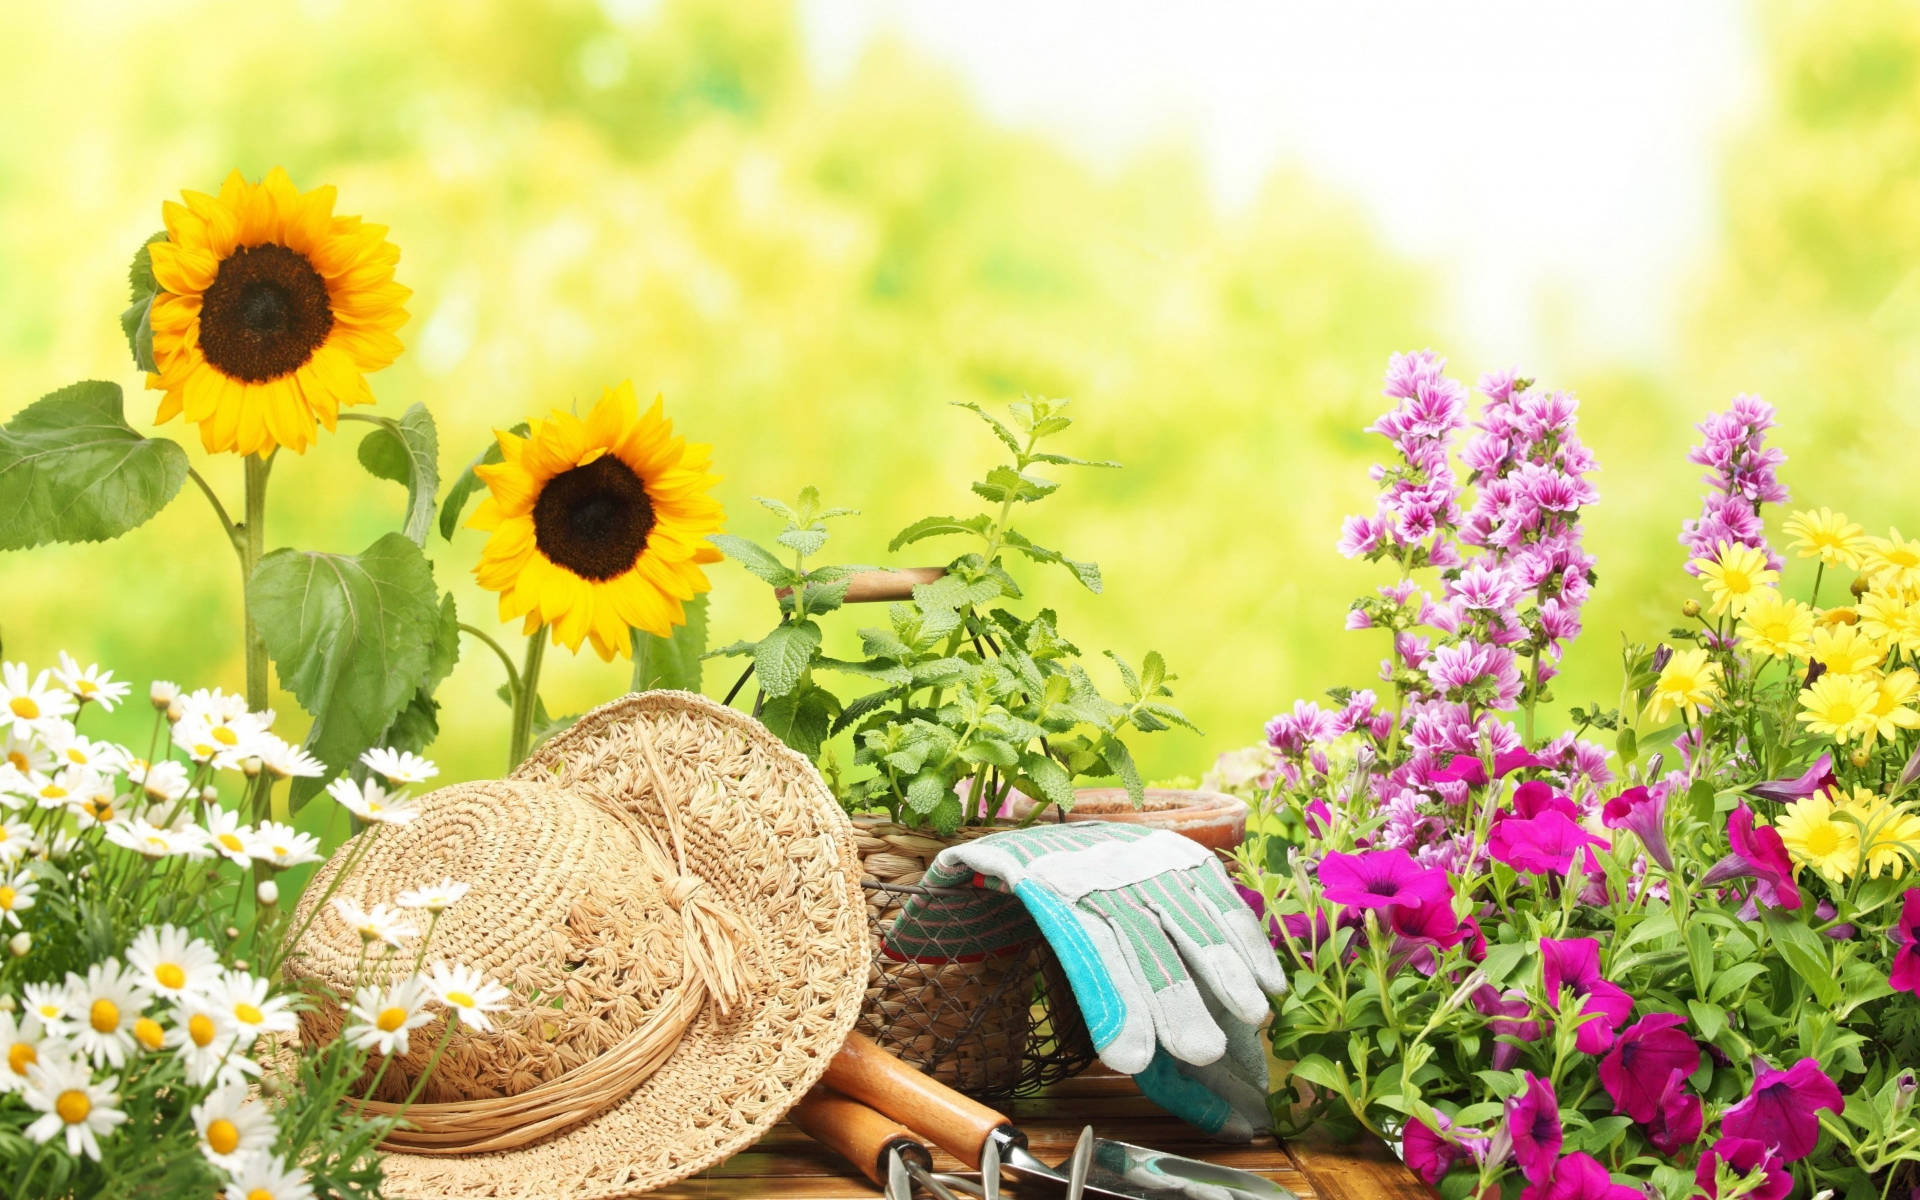 Gardening Tools And Flowers Photography Wallpaper